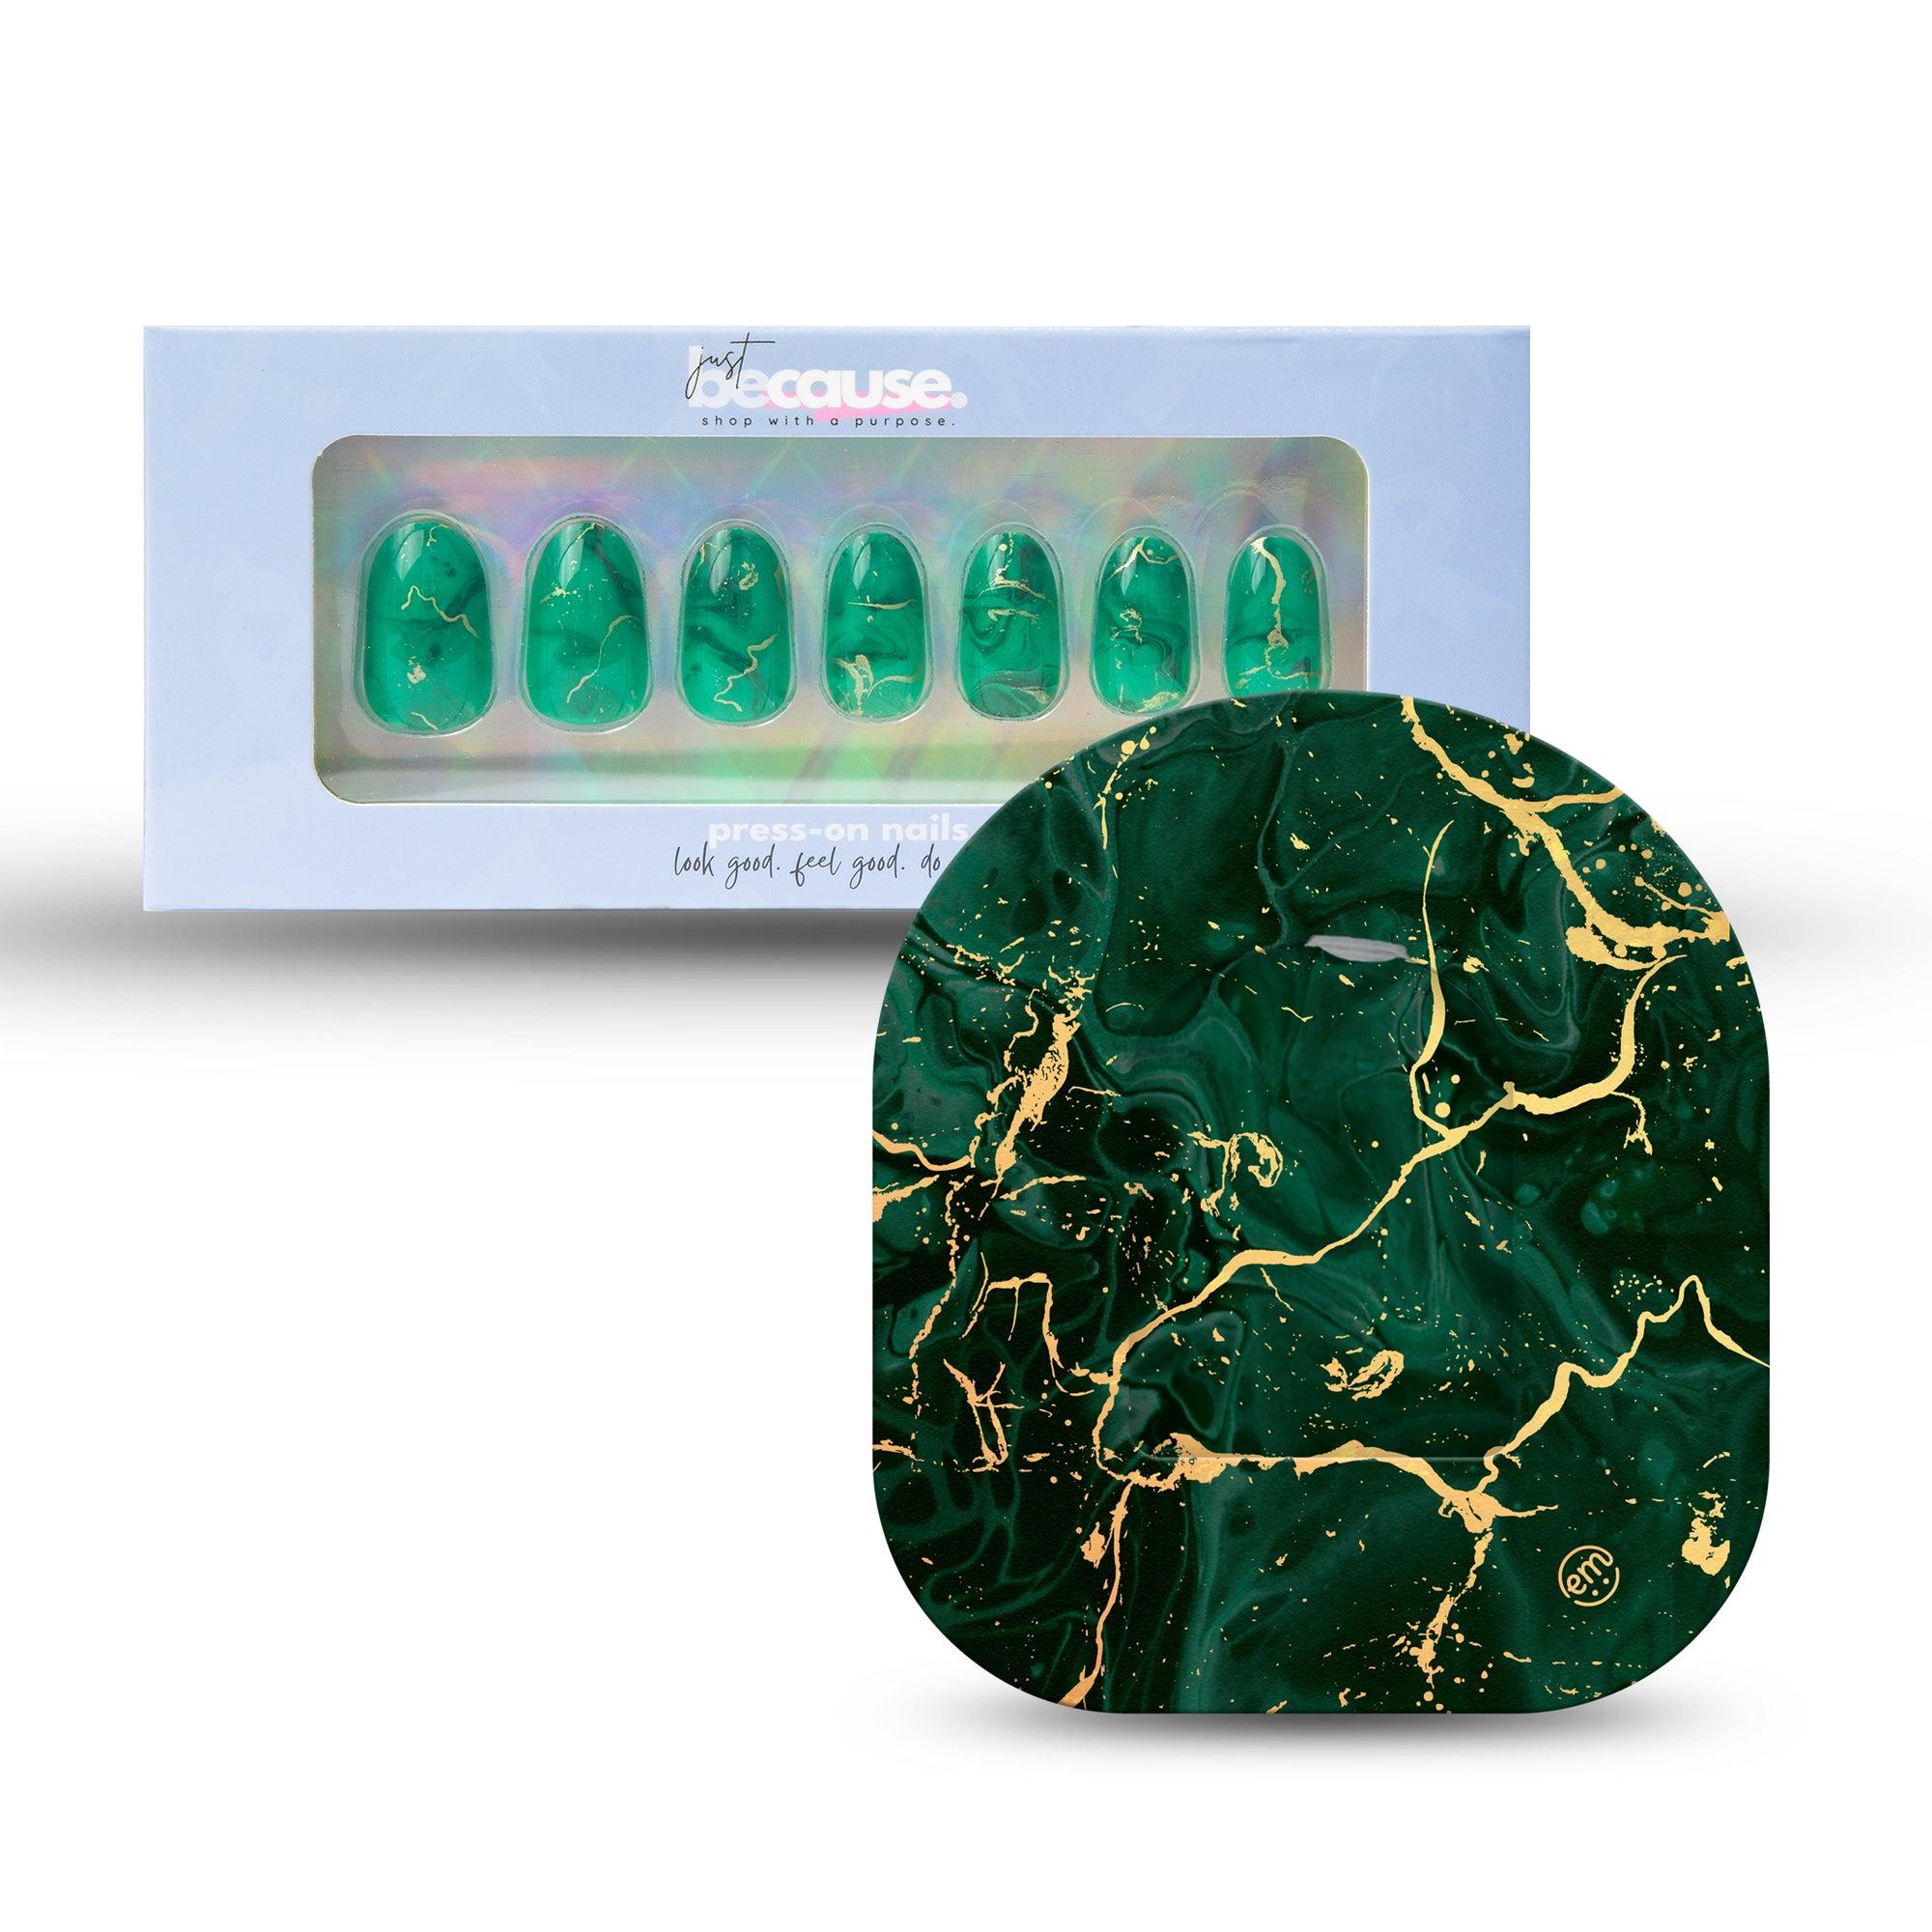 ExpressionMed Just BeCause 24 Pcs ABS Press on nails Medium, Green & Gold Marble Fake Nails set with matching Green & Gold Marble Omnipod Overlay Adhesive Tape and Center Sticker, Support T1D - ExpressionMed.com	